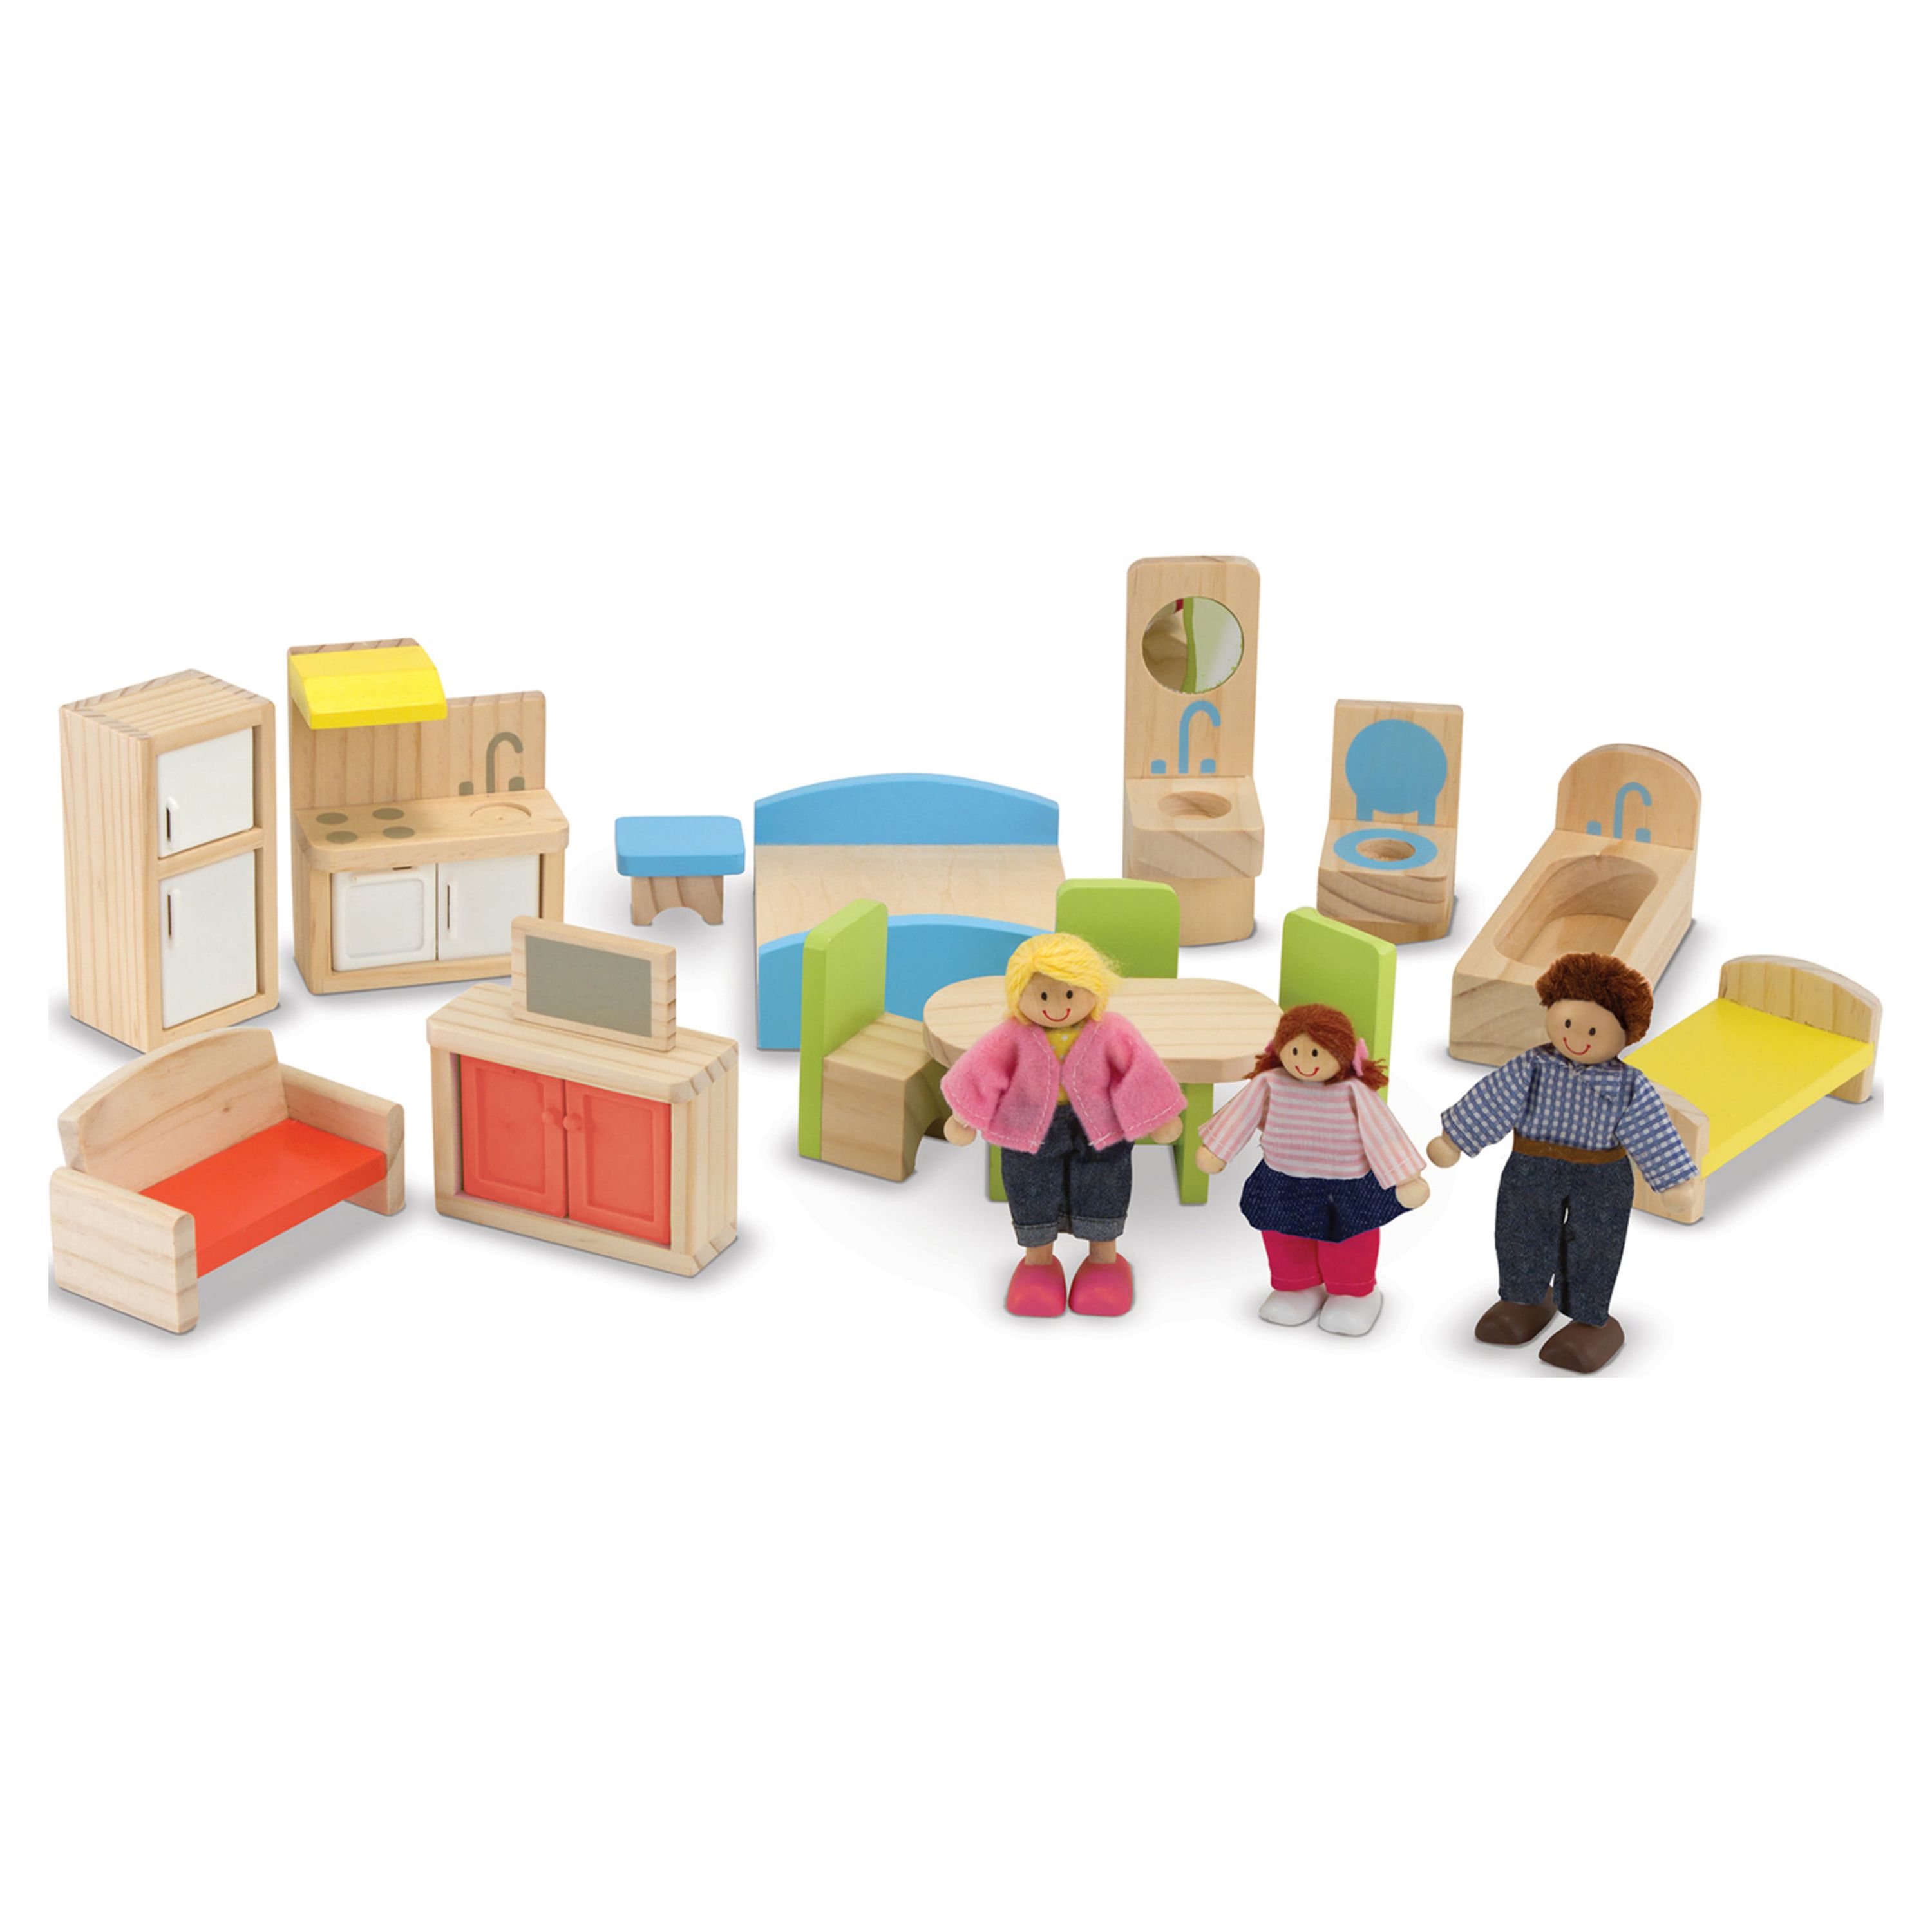 Melissa & Doug Wooden Hi-Rise Dollhouse With 15 Furniture Pieces, Garage, Working Elevator - image 5 of 10